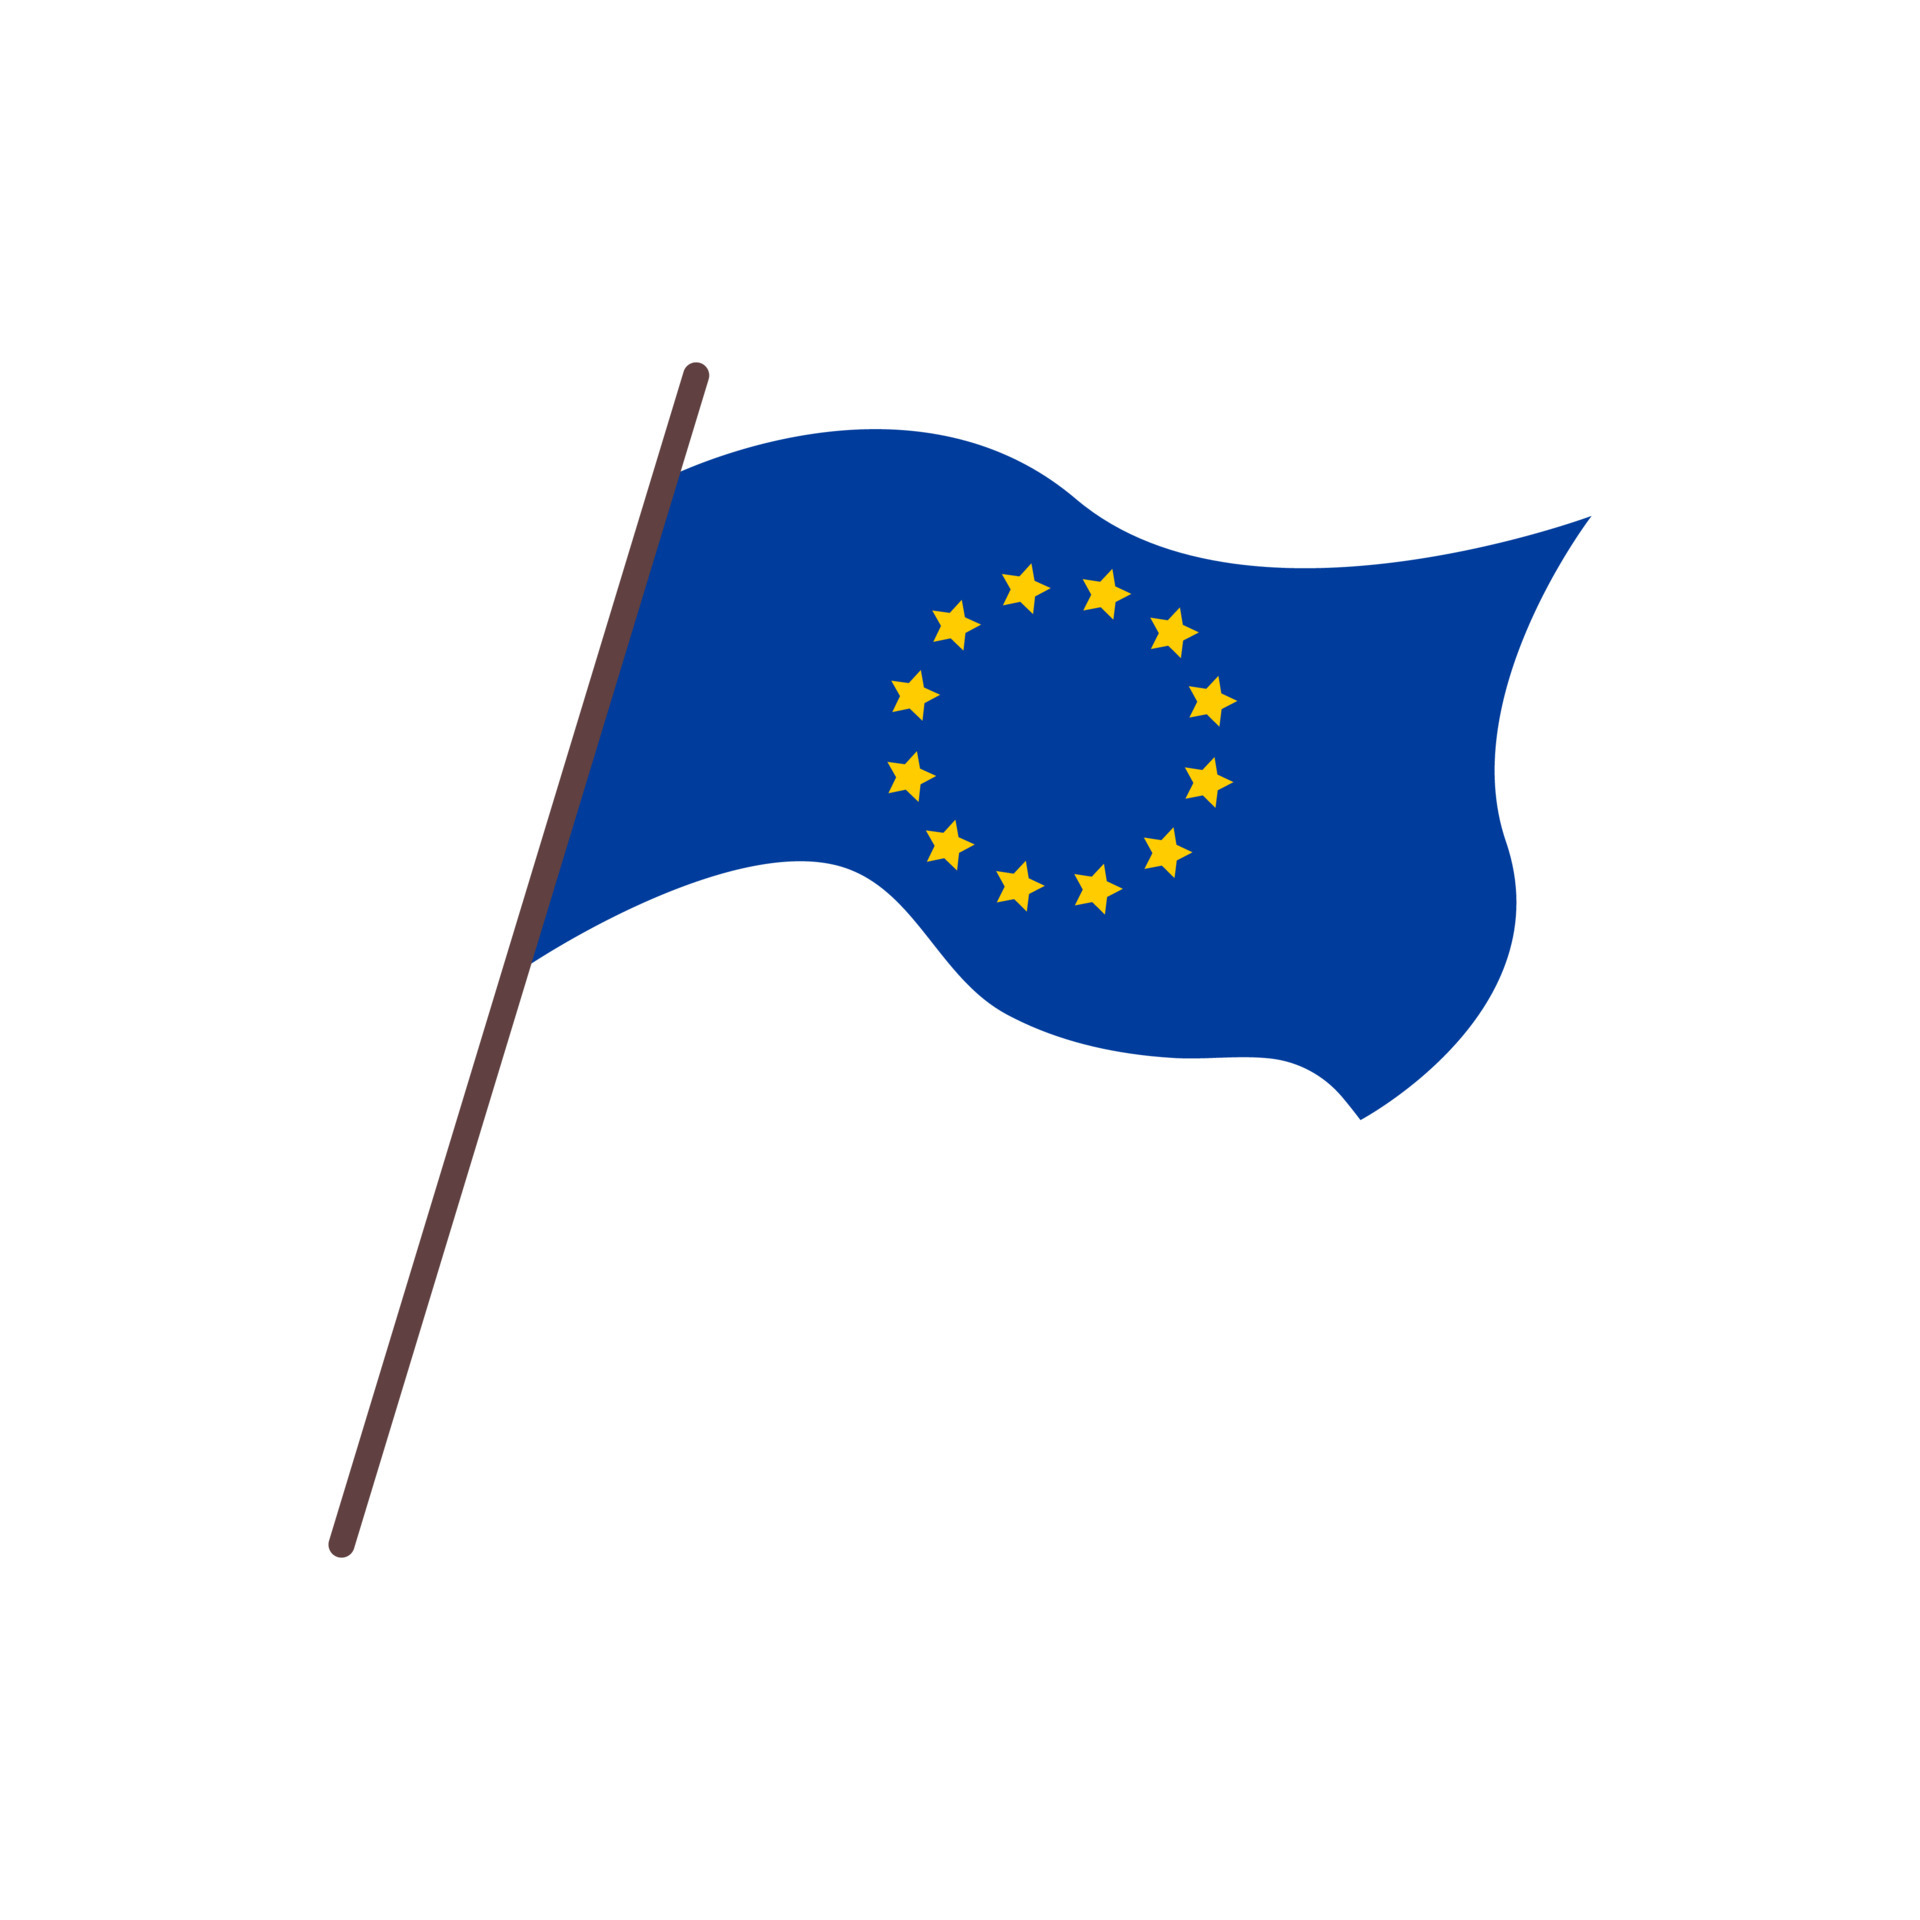 The European Union flag represents unity and cooperation among European nations. Its bright blue background with 12 golden stars creates a harmonious and peaceful image that is instantly recognizable as a symbol of the EU. Click to see the image and be inspired by its powerful meaning.